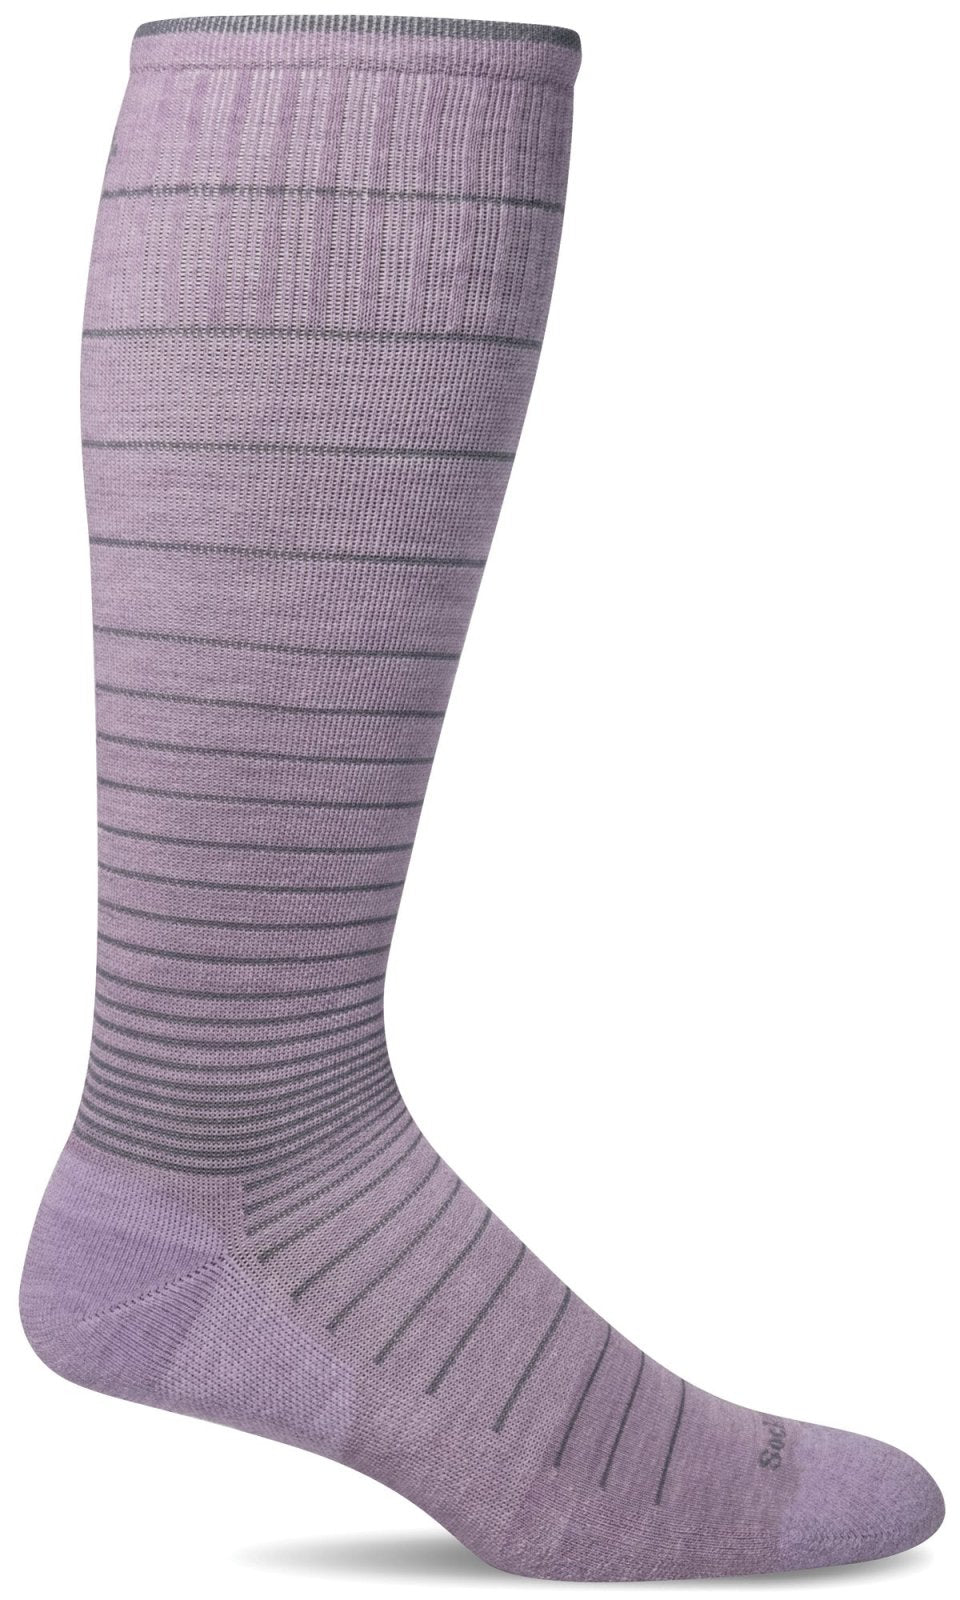 Sockwell Women's Moderate Compression Socks (15-20 mmHg) – Valley